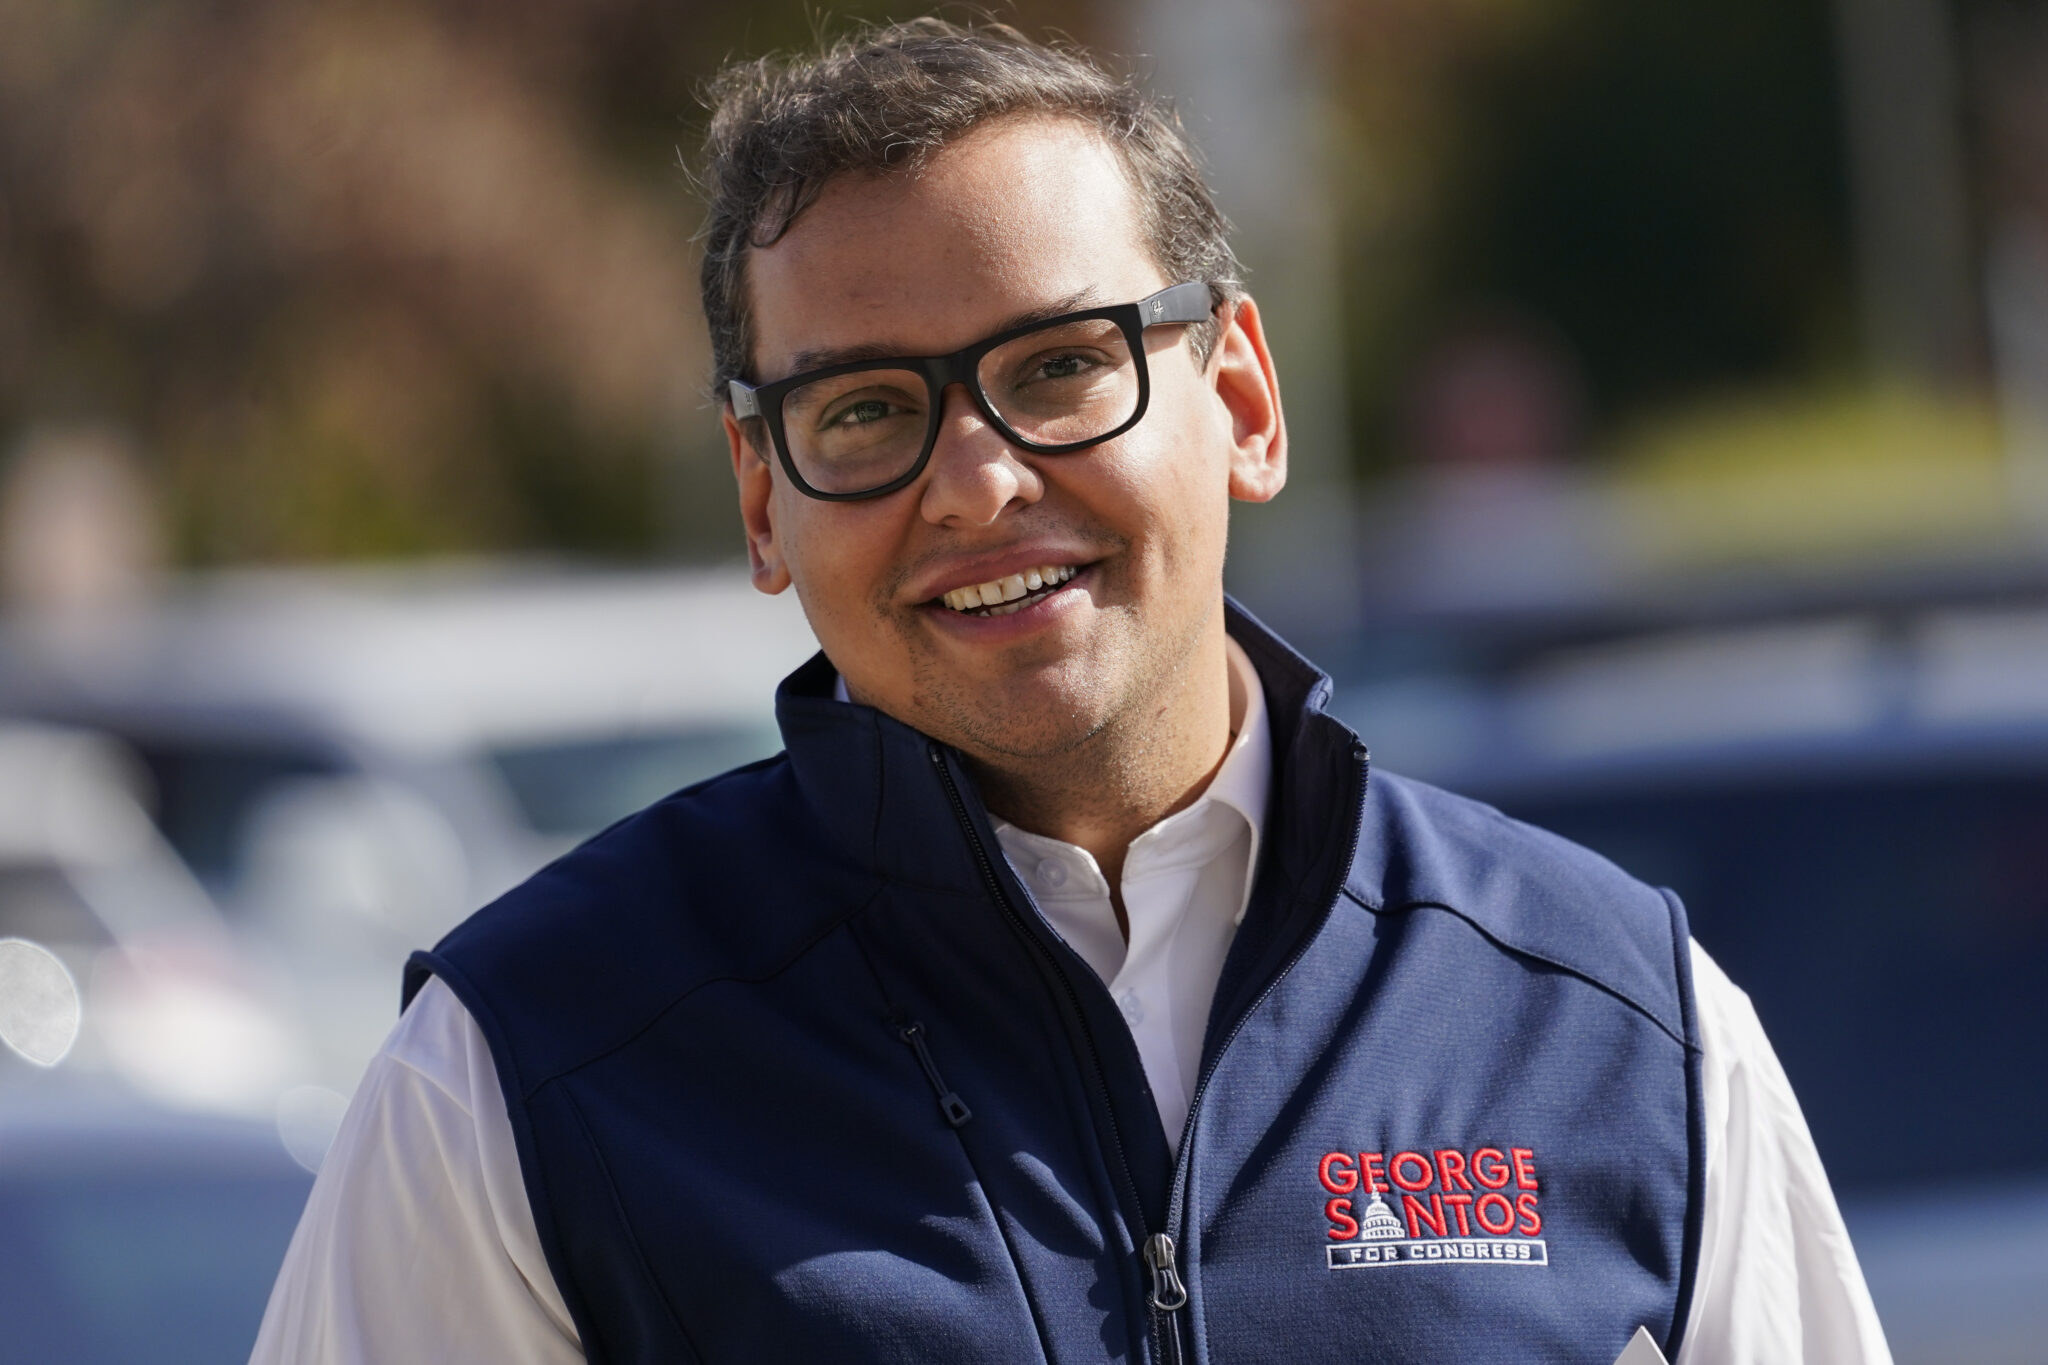 Republican candidate for New York's 3rd Congressional District George Santos campaigns outside a Stop and Shop store, Saturday, Nov. 5, 2022, in Glen Cove, N.Y. (AP Photo/Mary Altaffer)